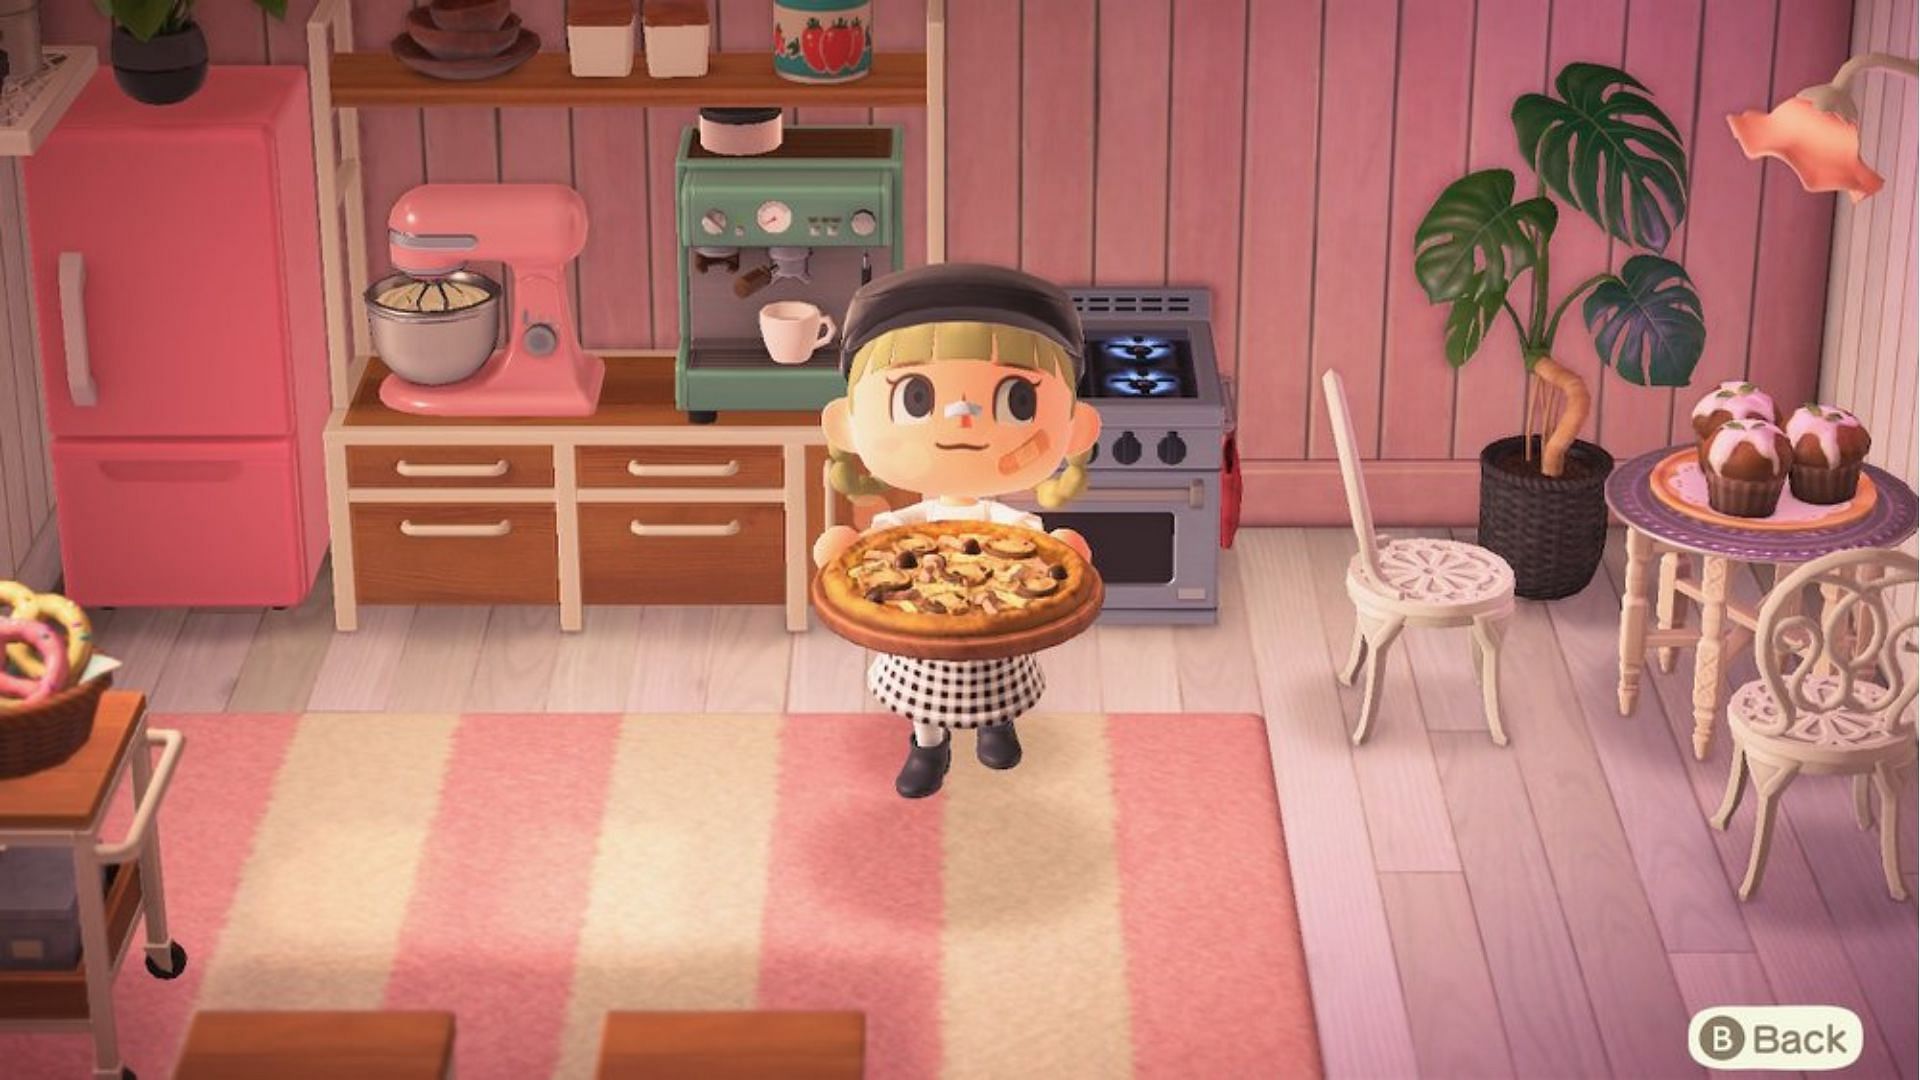 Animal Crossing: New Horizons recently got the cooking featured added to the game (Image via Gamerzy Magazine)